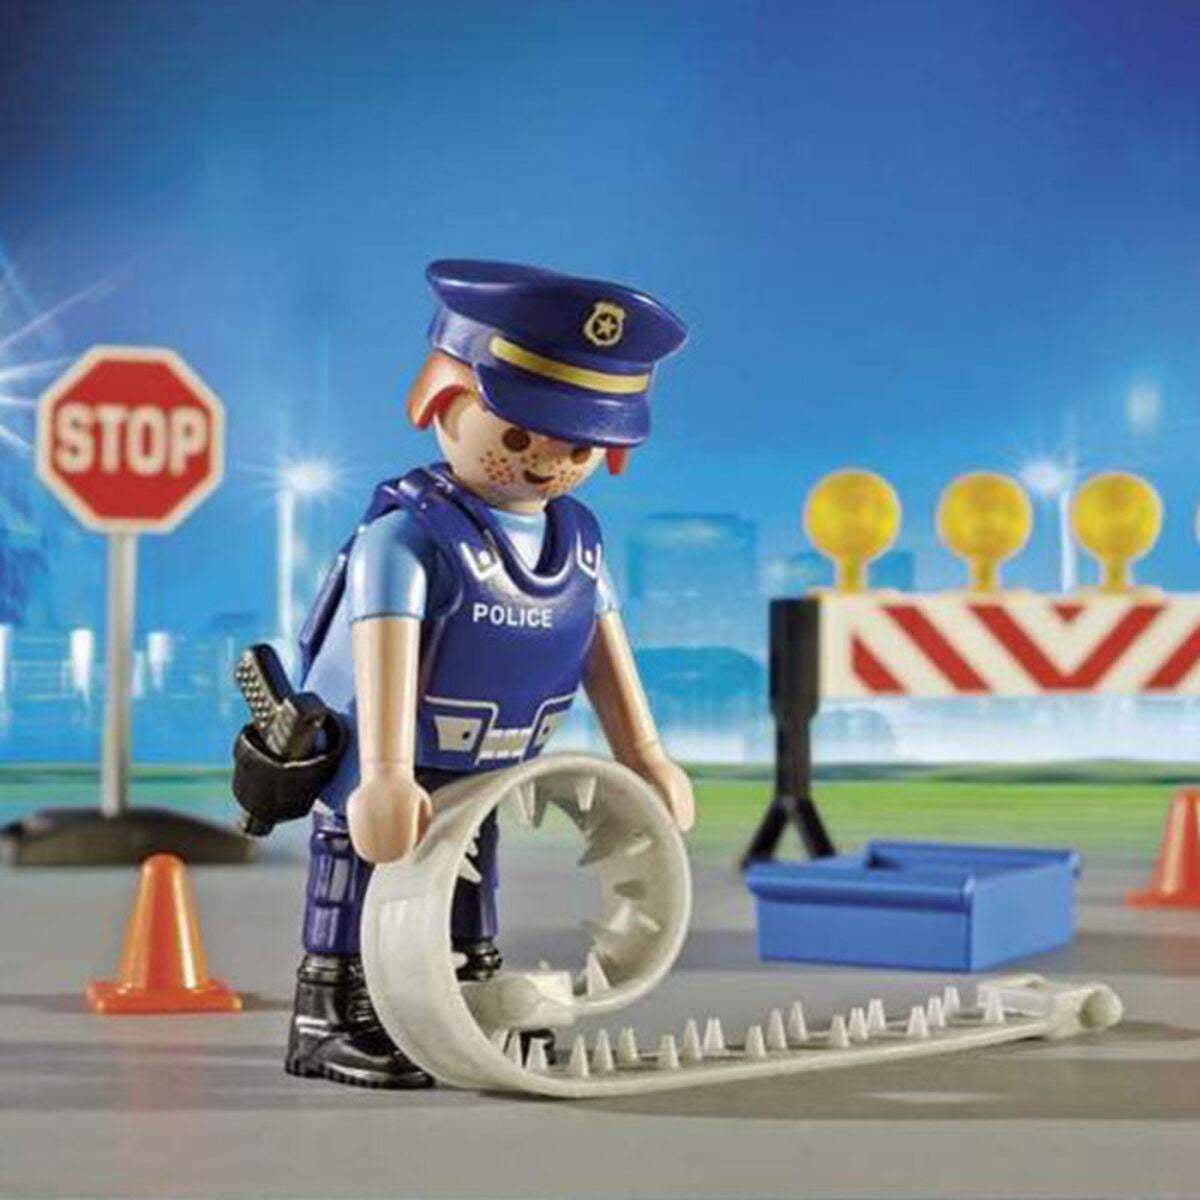 City Action Police Playmobil 6924